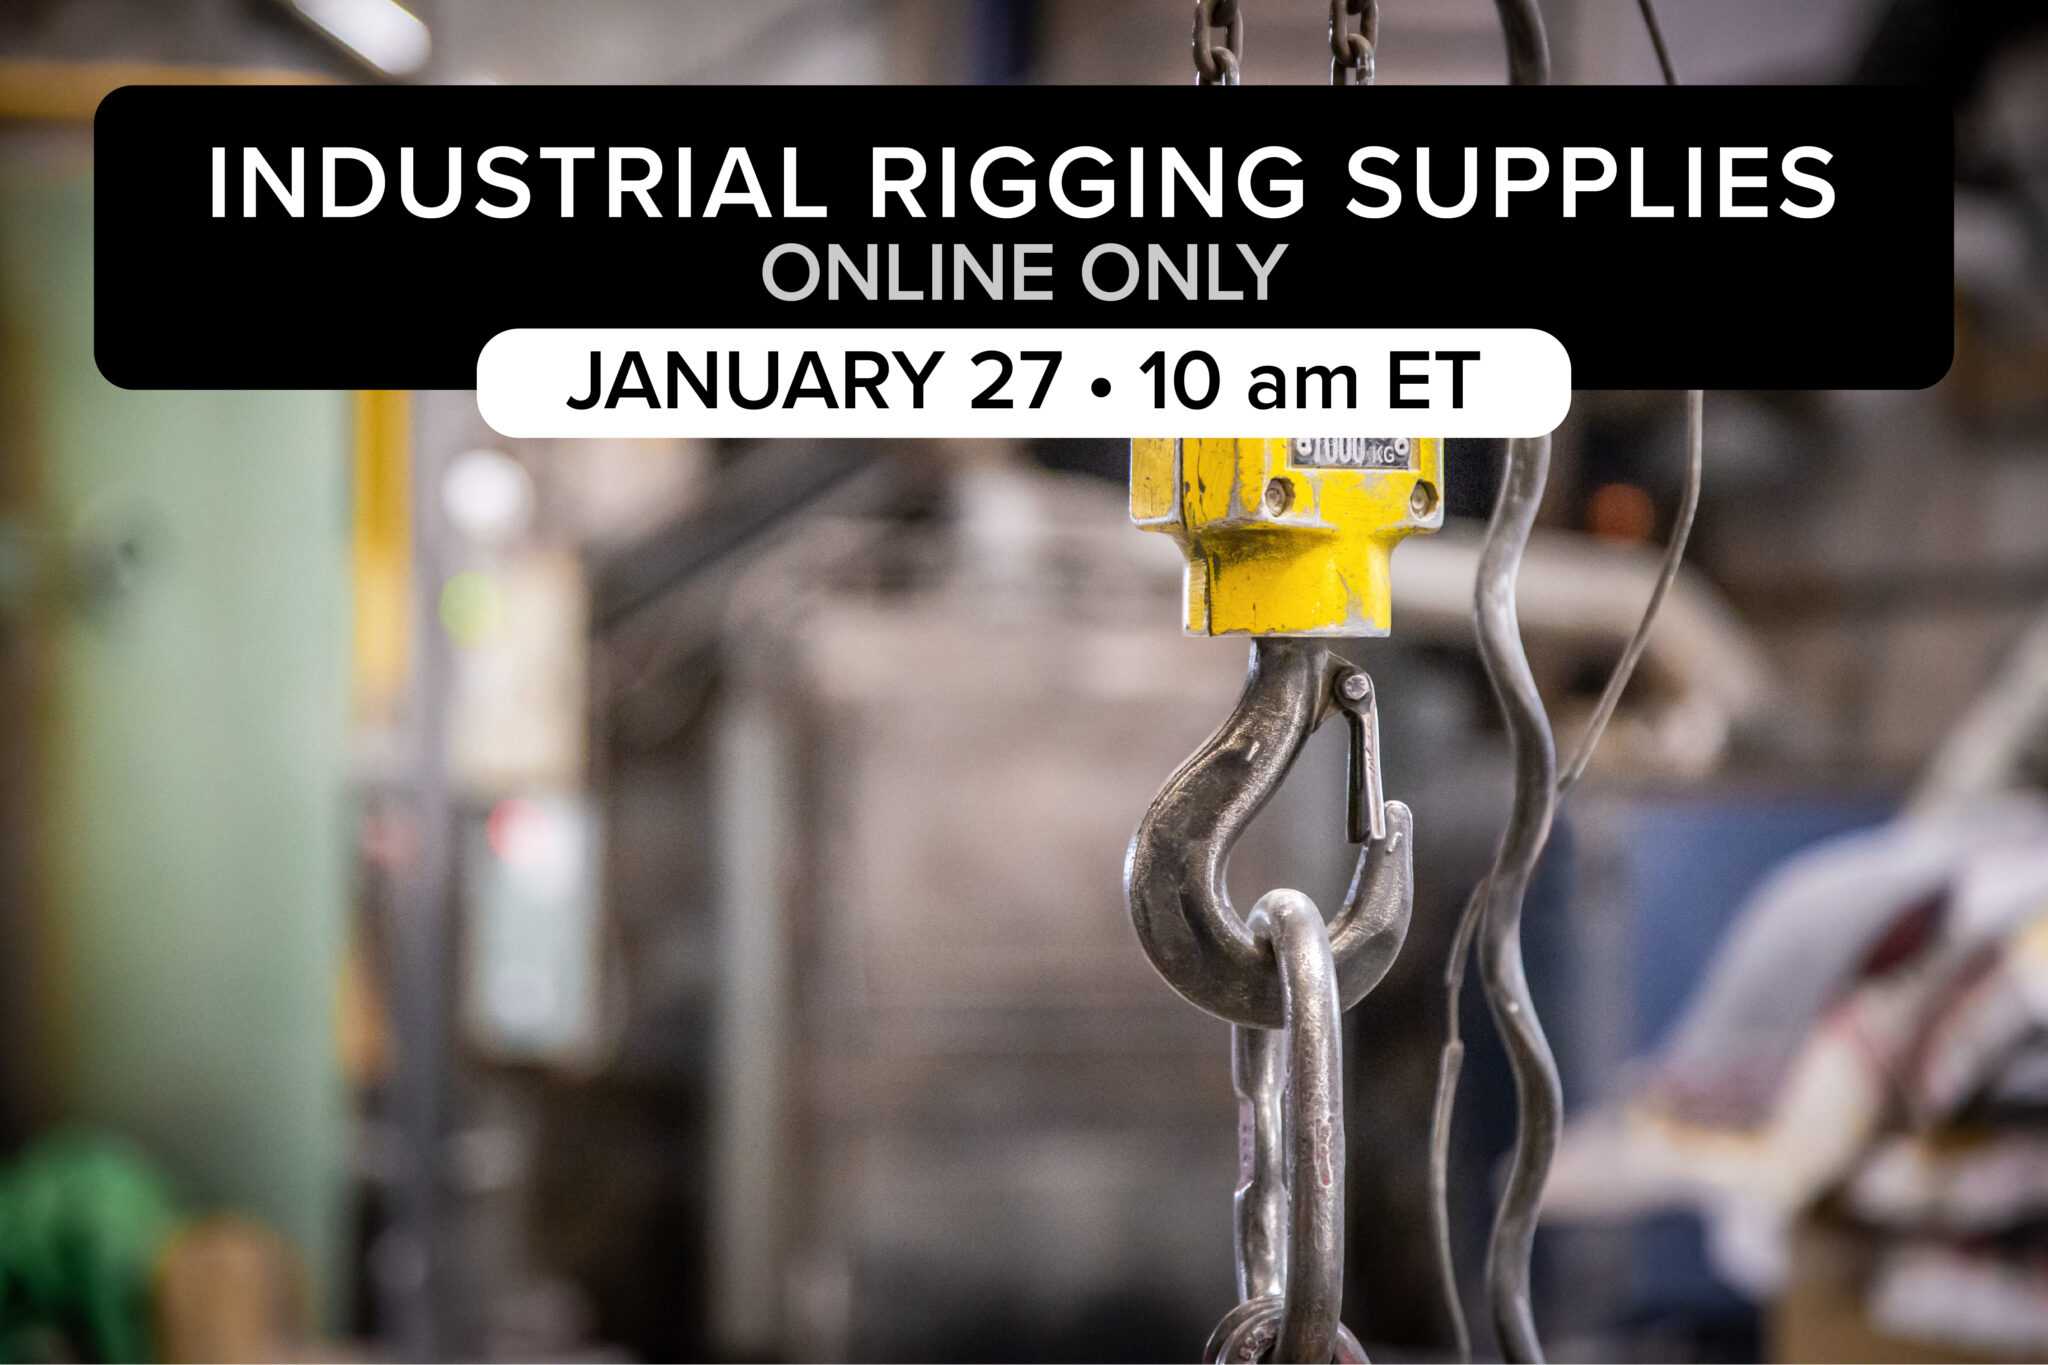 1/27 Industrial Rigging Supplies From North Carolina